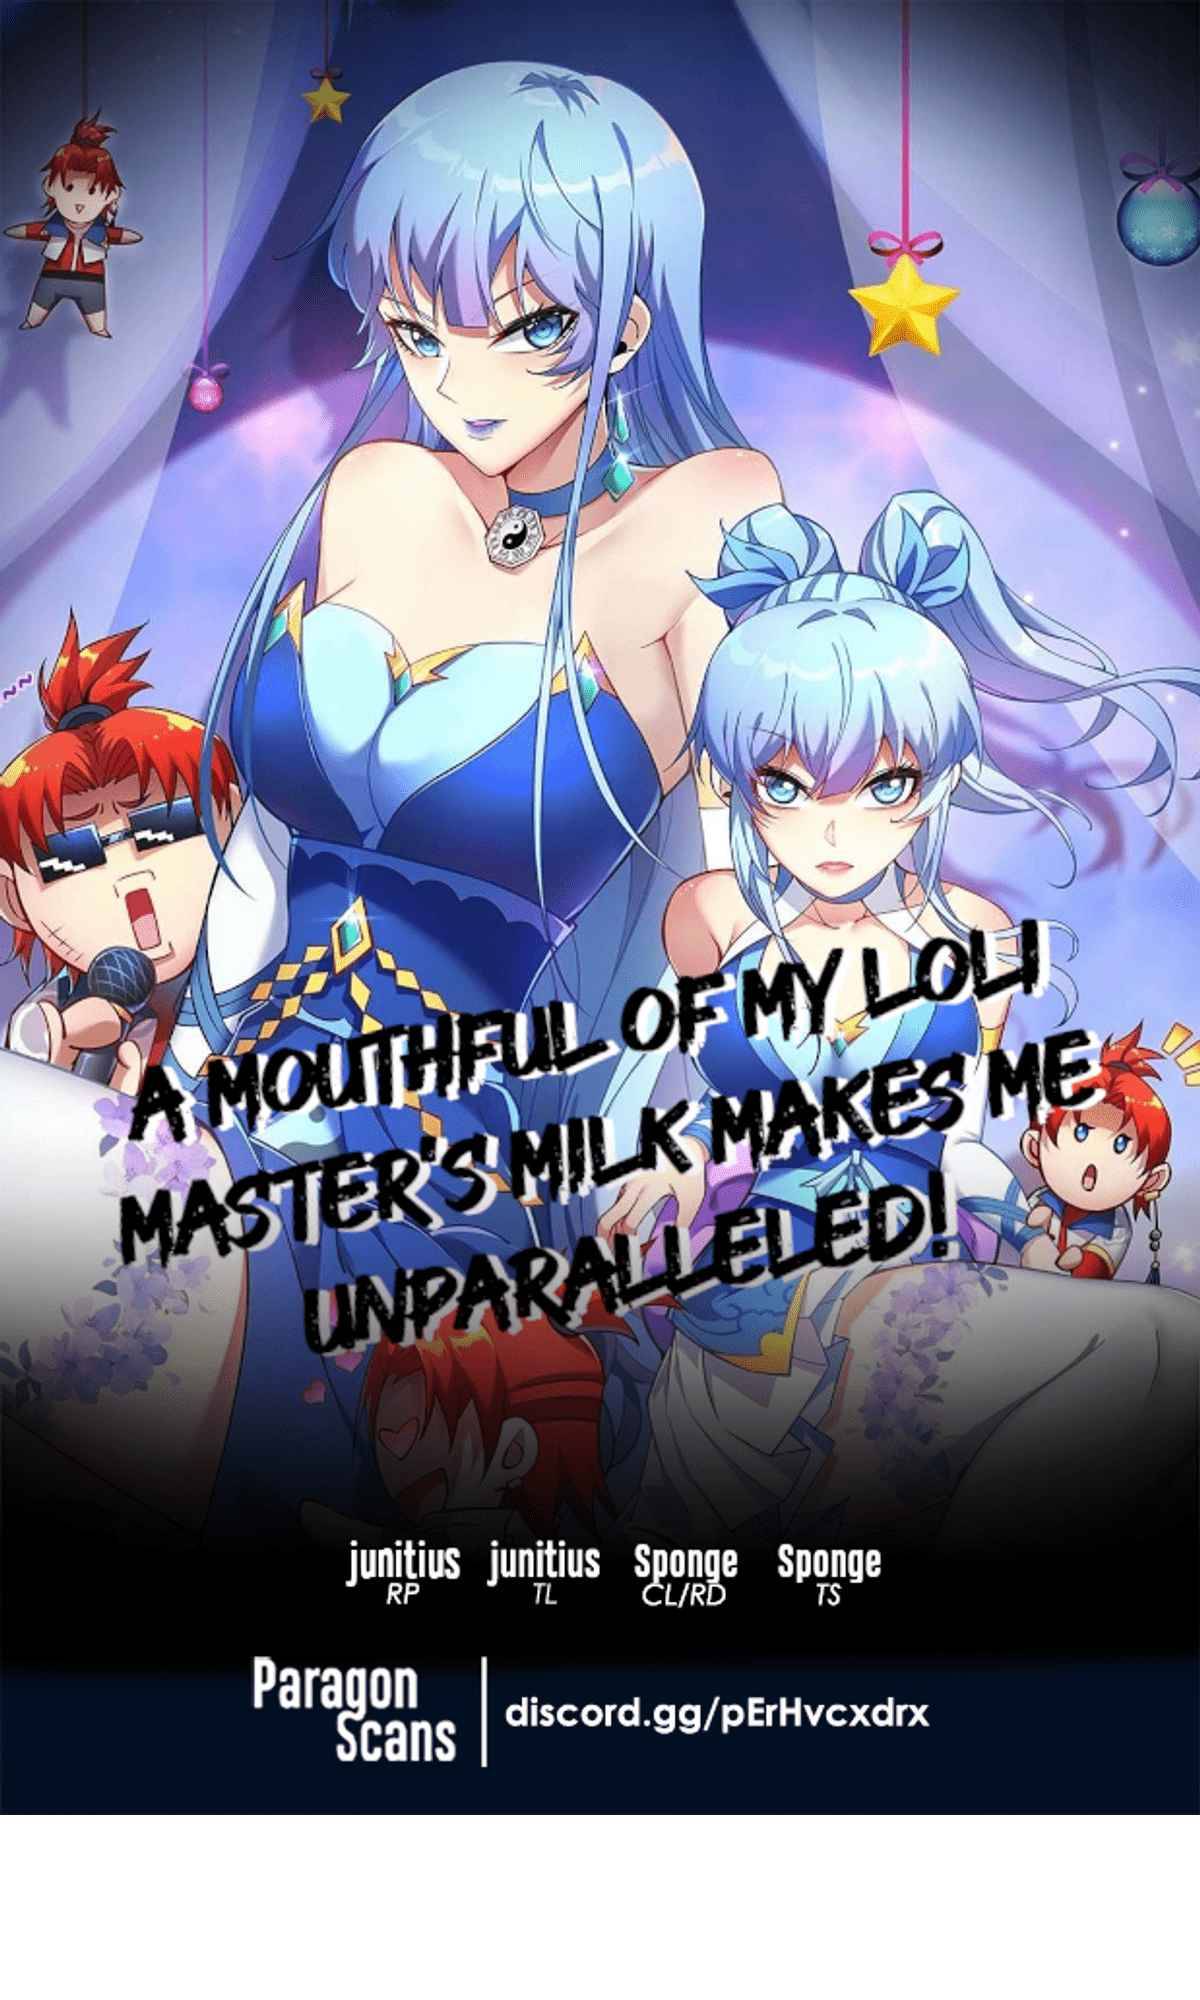 A Mouthful of My L0li Master's Milk Makes Me Unparalleled - chapter 20 - #1